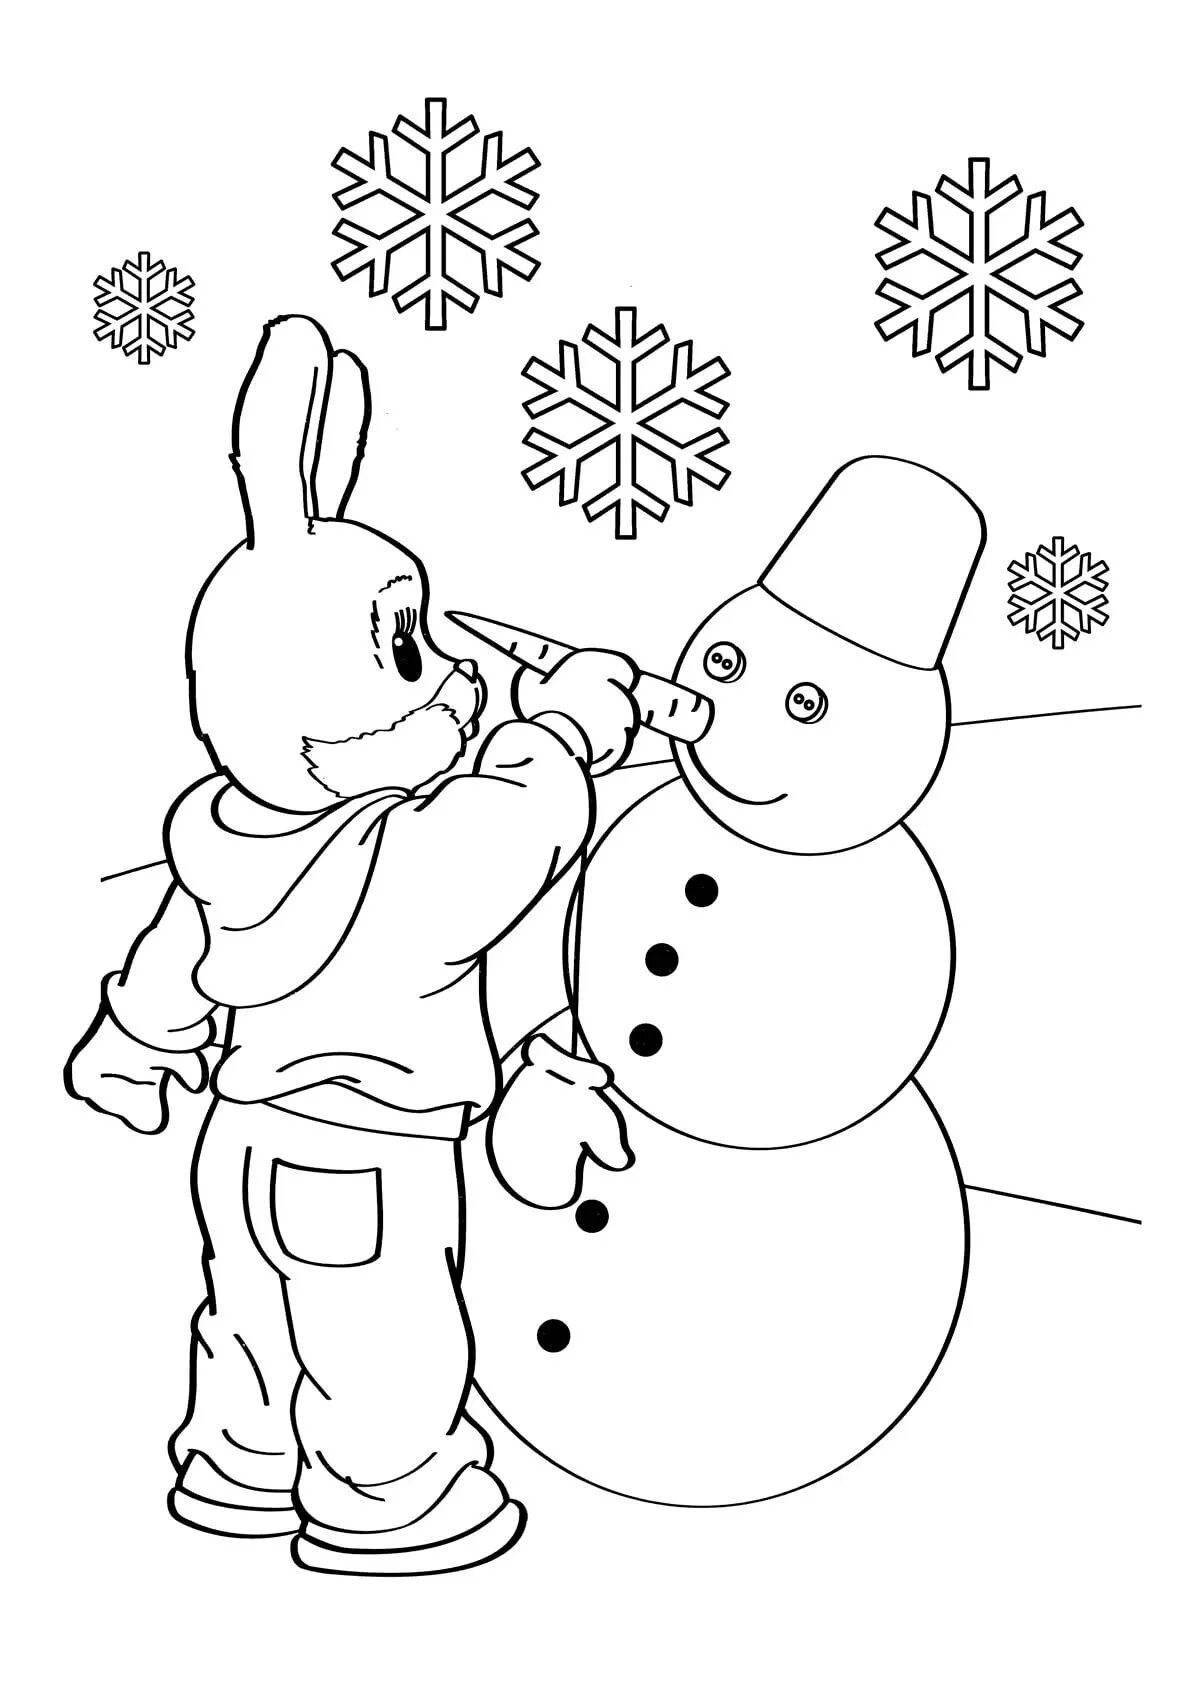 Vivid winter coloring book for 3-4 year olds